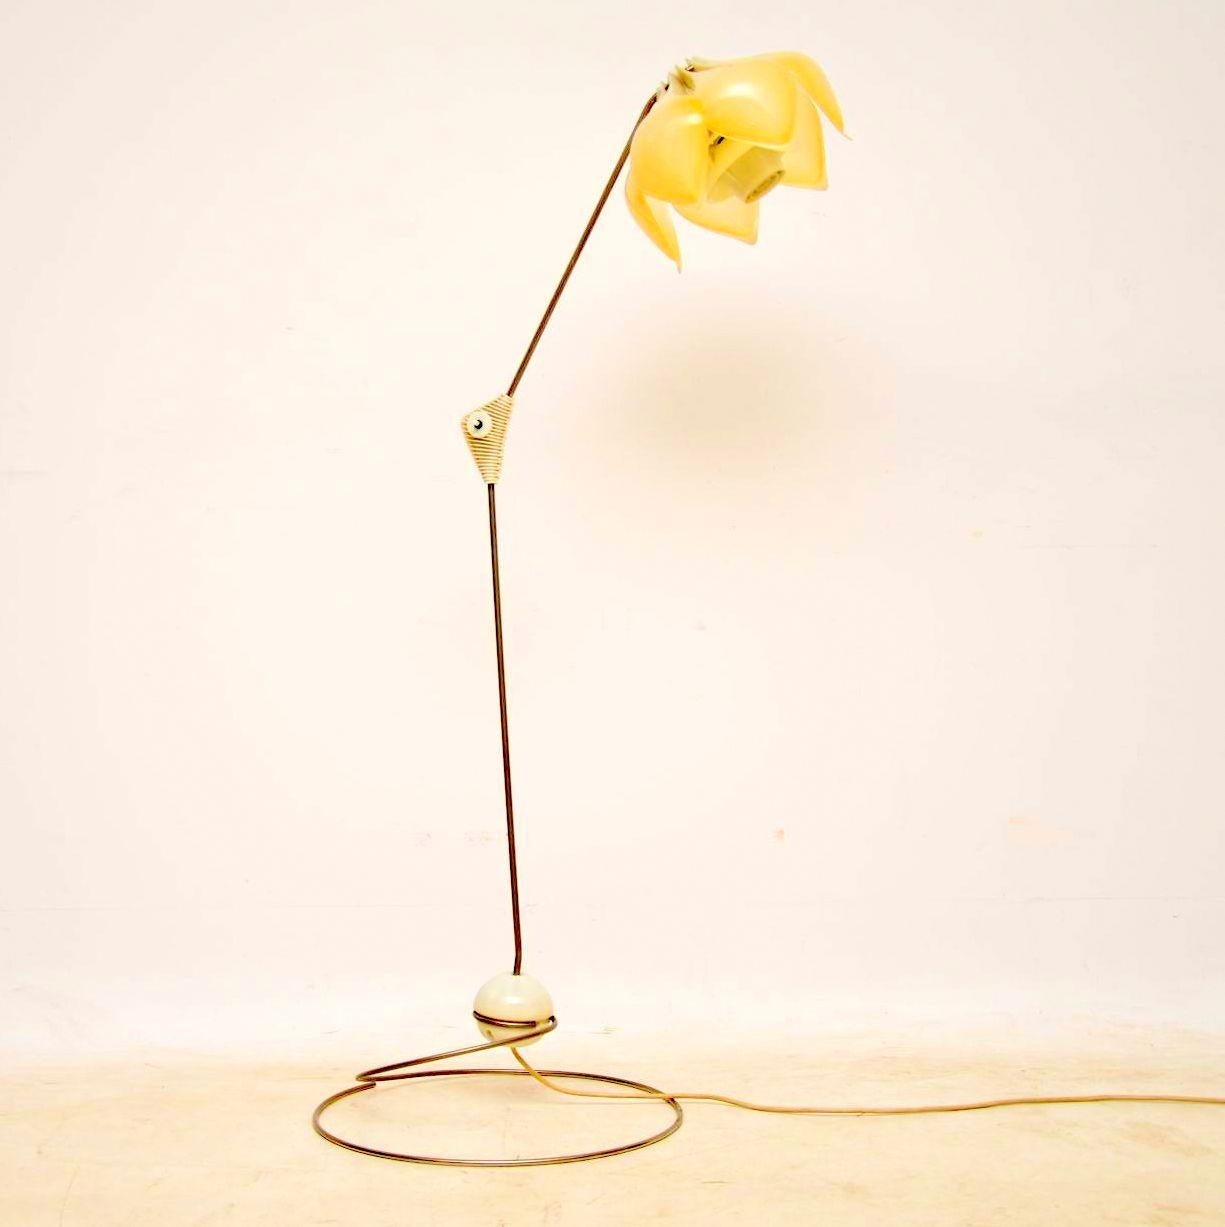 An absolutely stunning and extremely rare floor lamp, this is the Symanka SY1, designed by Gunter Ssymmank in 1959. This was made in Germany by Integra, it dates from the 1950s, it is in excellent original condition and good working order. This has